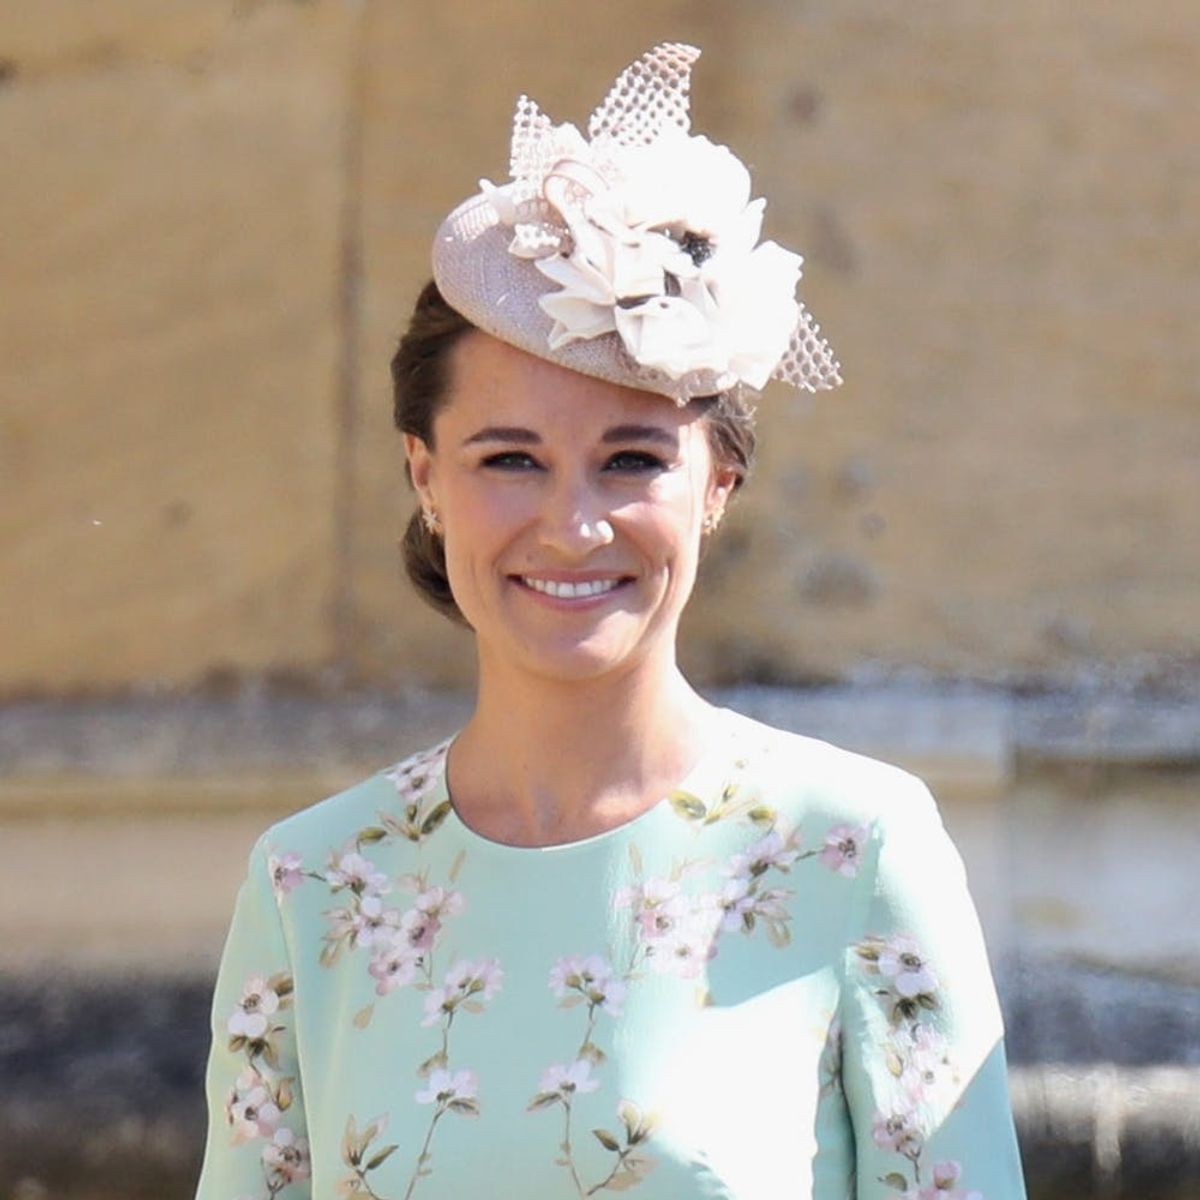 Pippa Middleton Confirms She’s Pregnant With Her First Child - Brit + Co